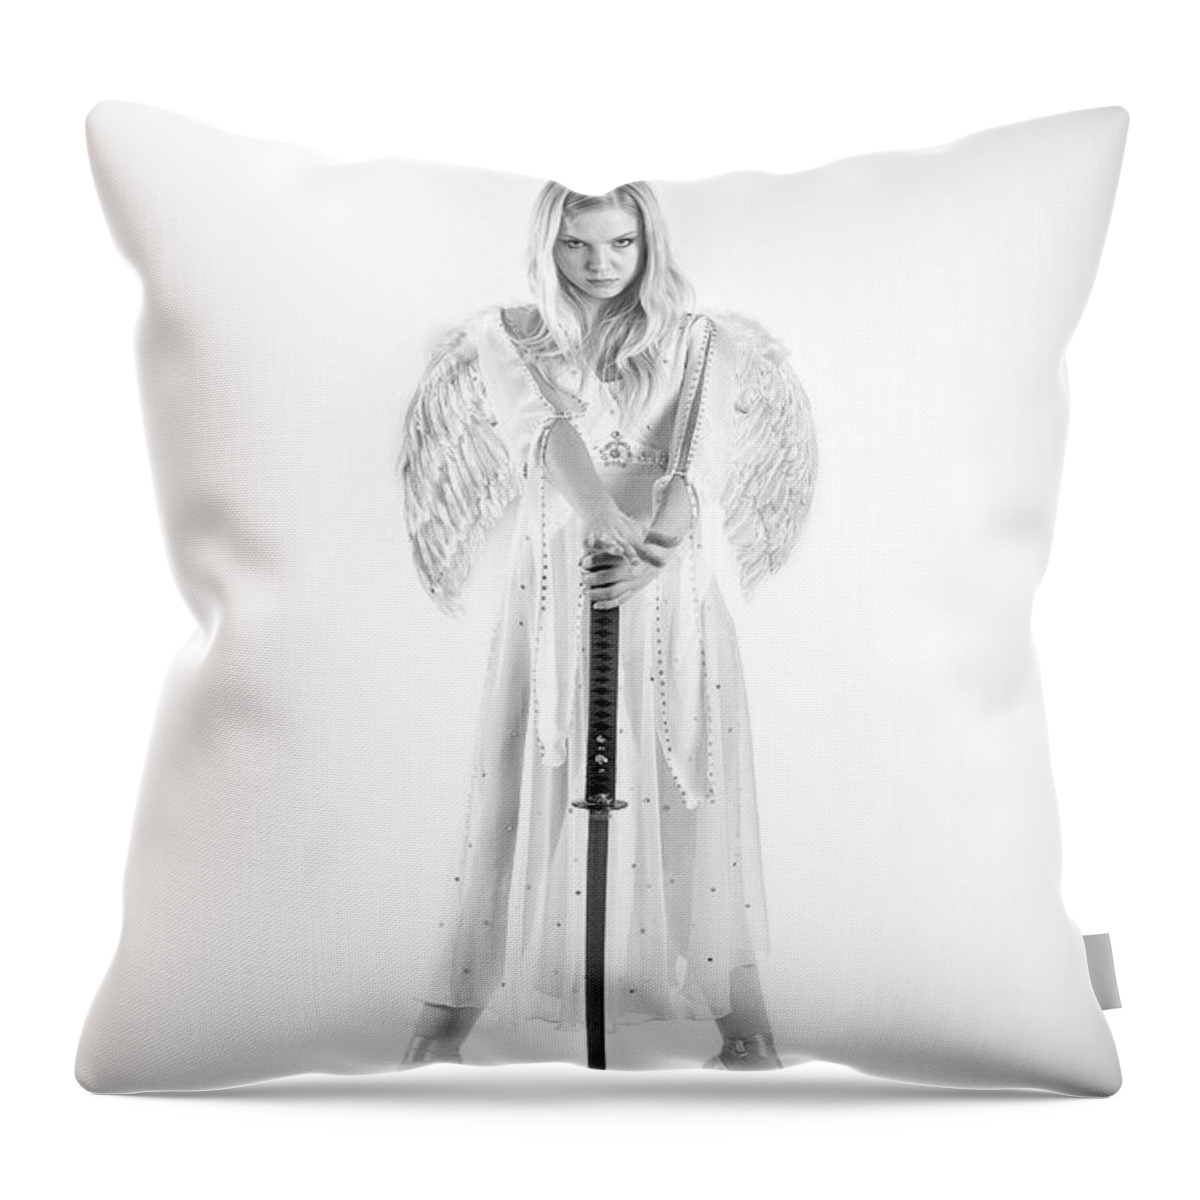  Throw Pillow featuring the photograph Defender second image by Edward Galagan